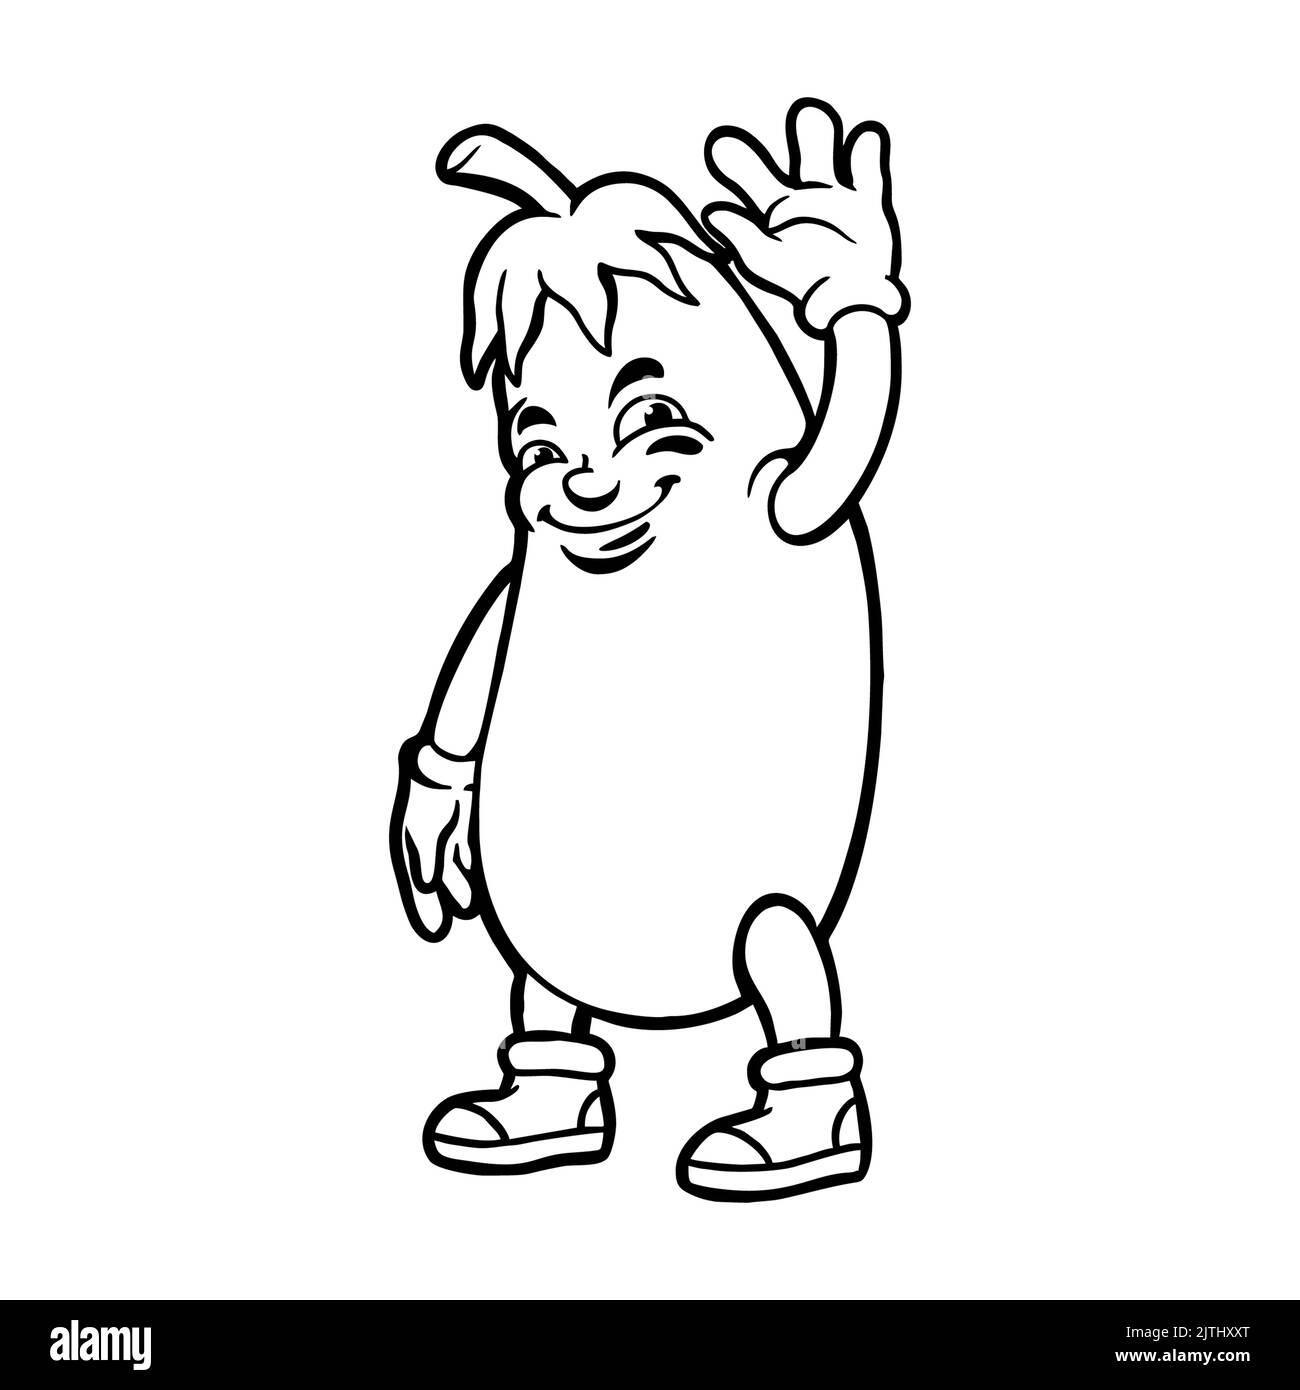 Eggplant Cartoon Character Coloring Book Vector illustrations for your work Logo, mascot merchandise t-shirt, stickers and Label designs, poster, gree Stock Photo